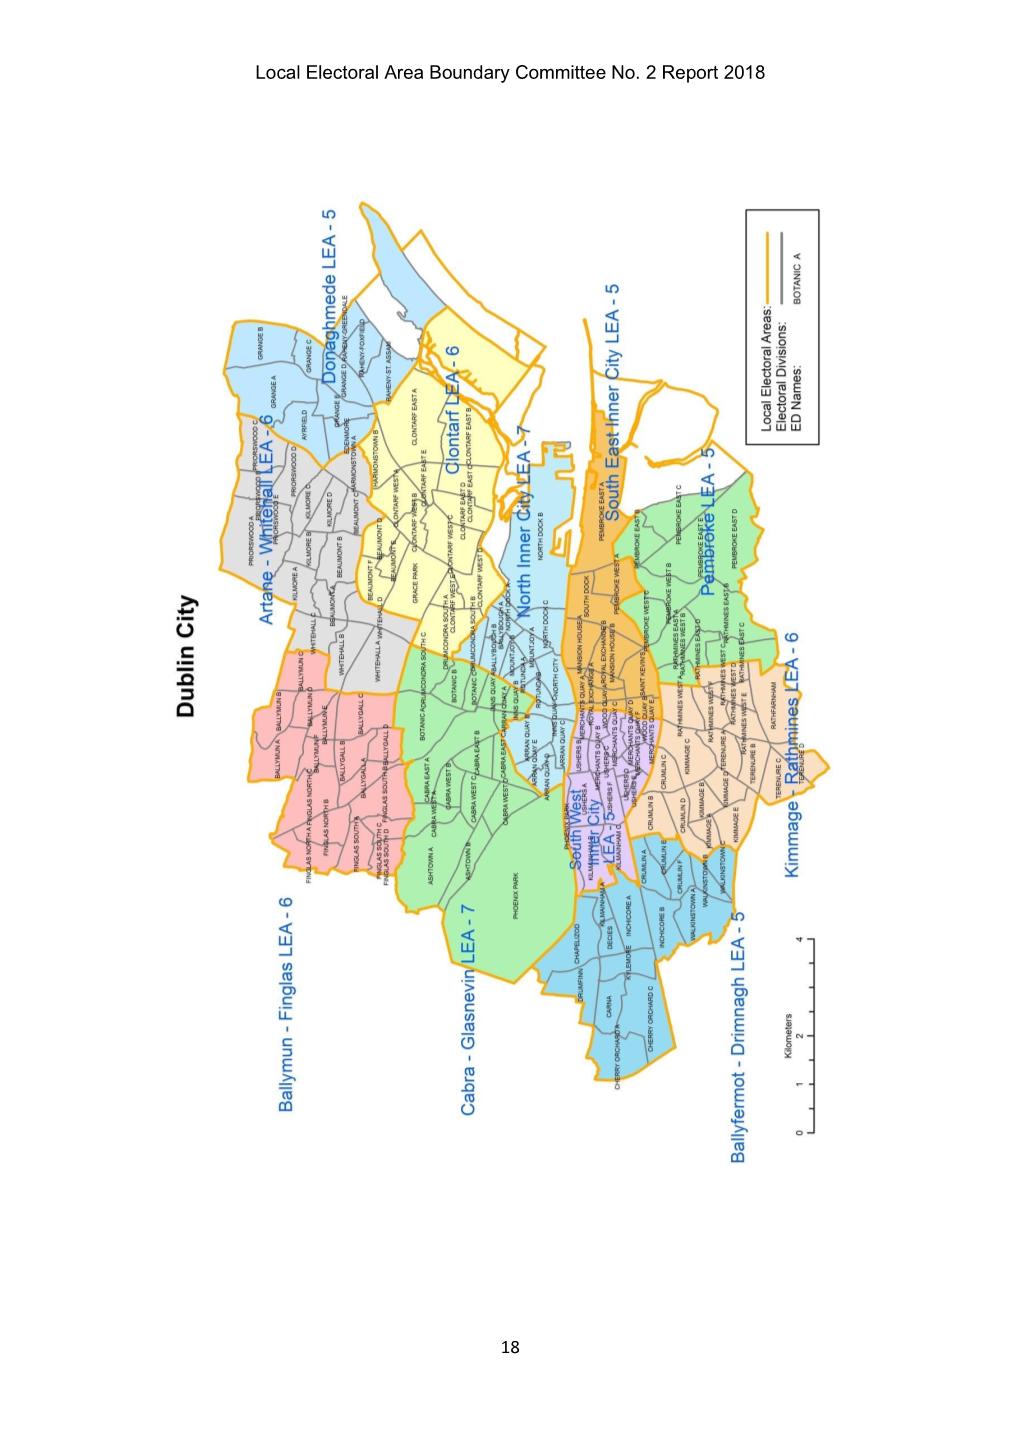 Local Electoral Area Boundary Committee No. 2 Report 2018